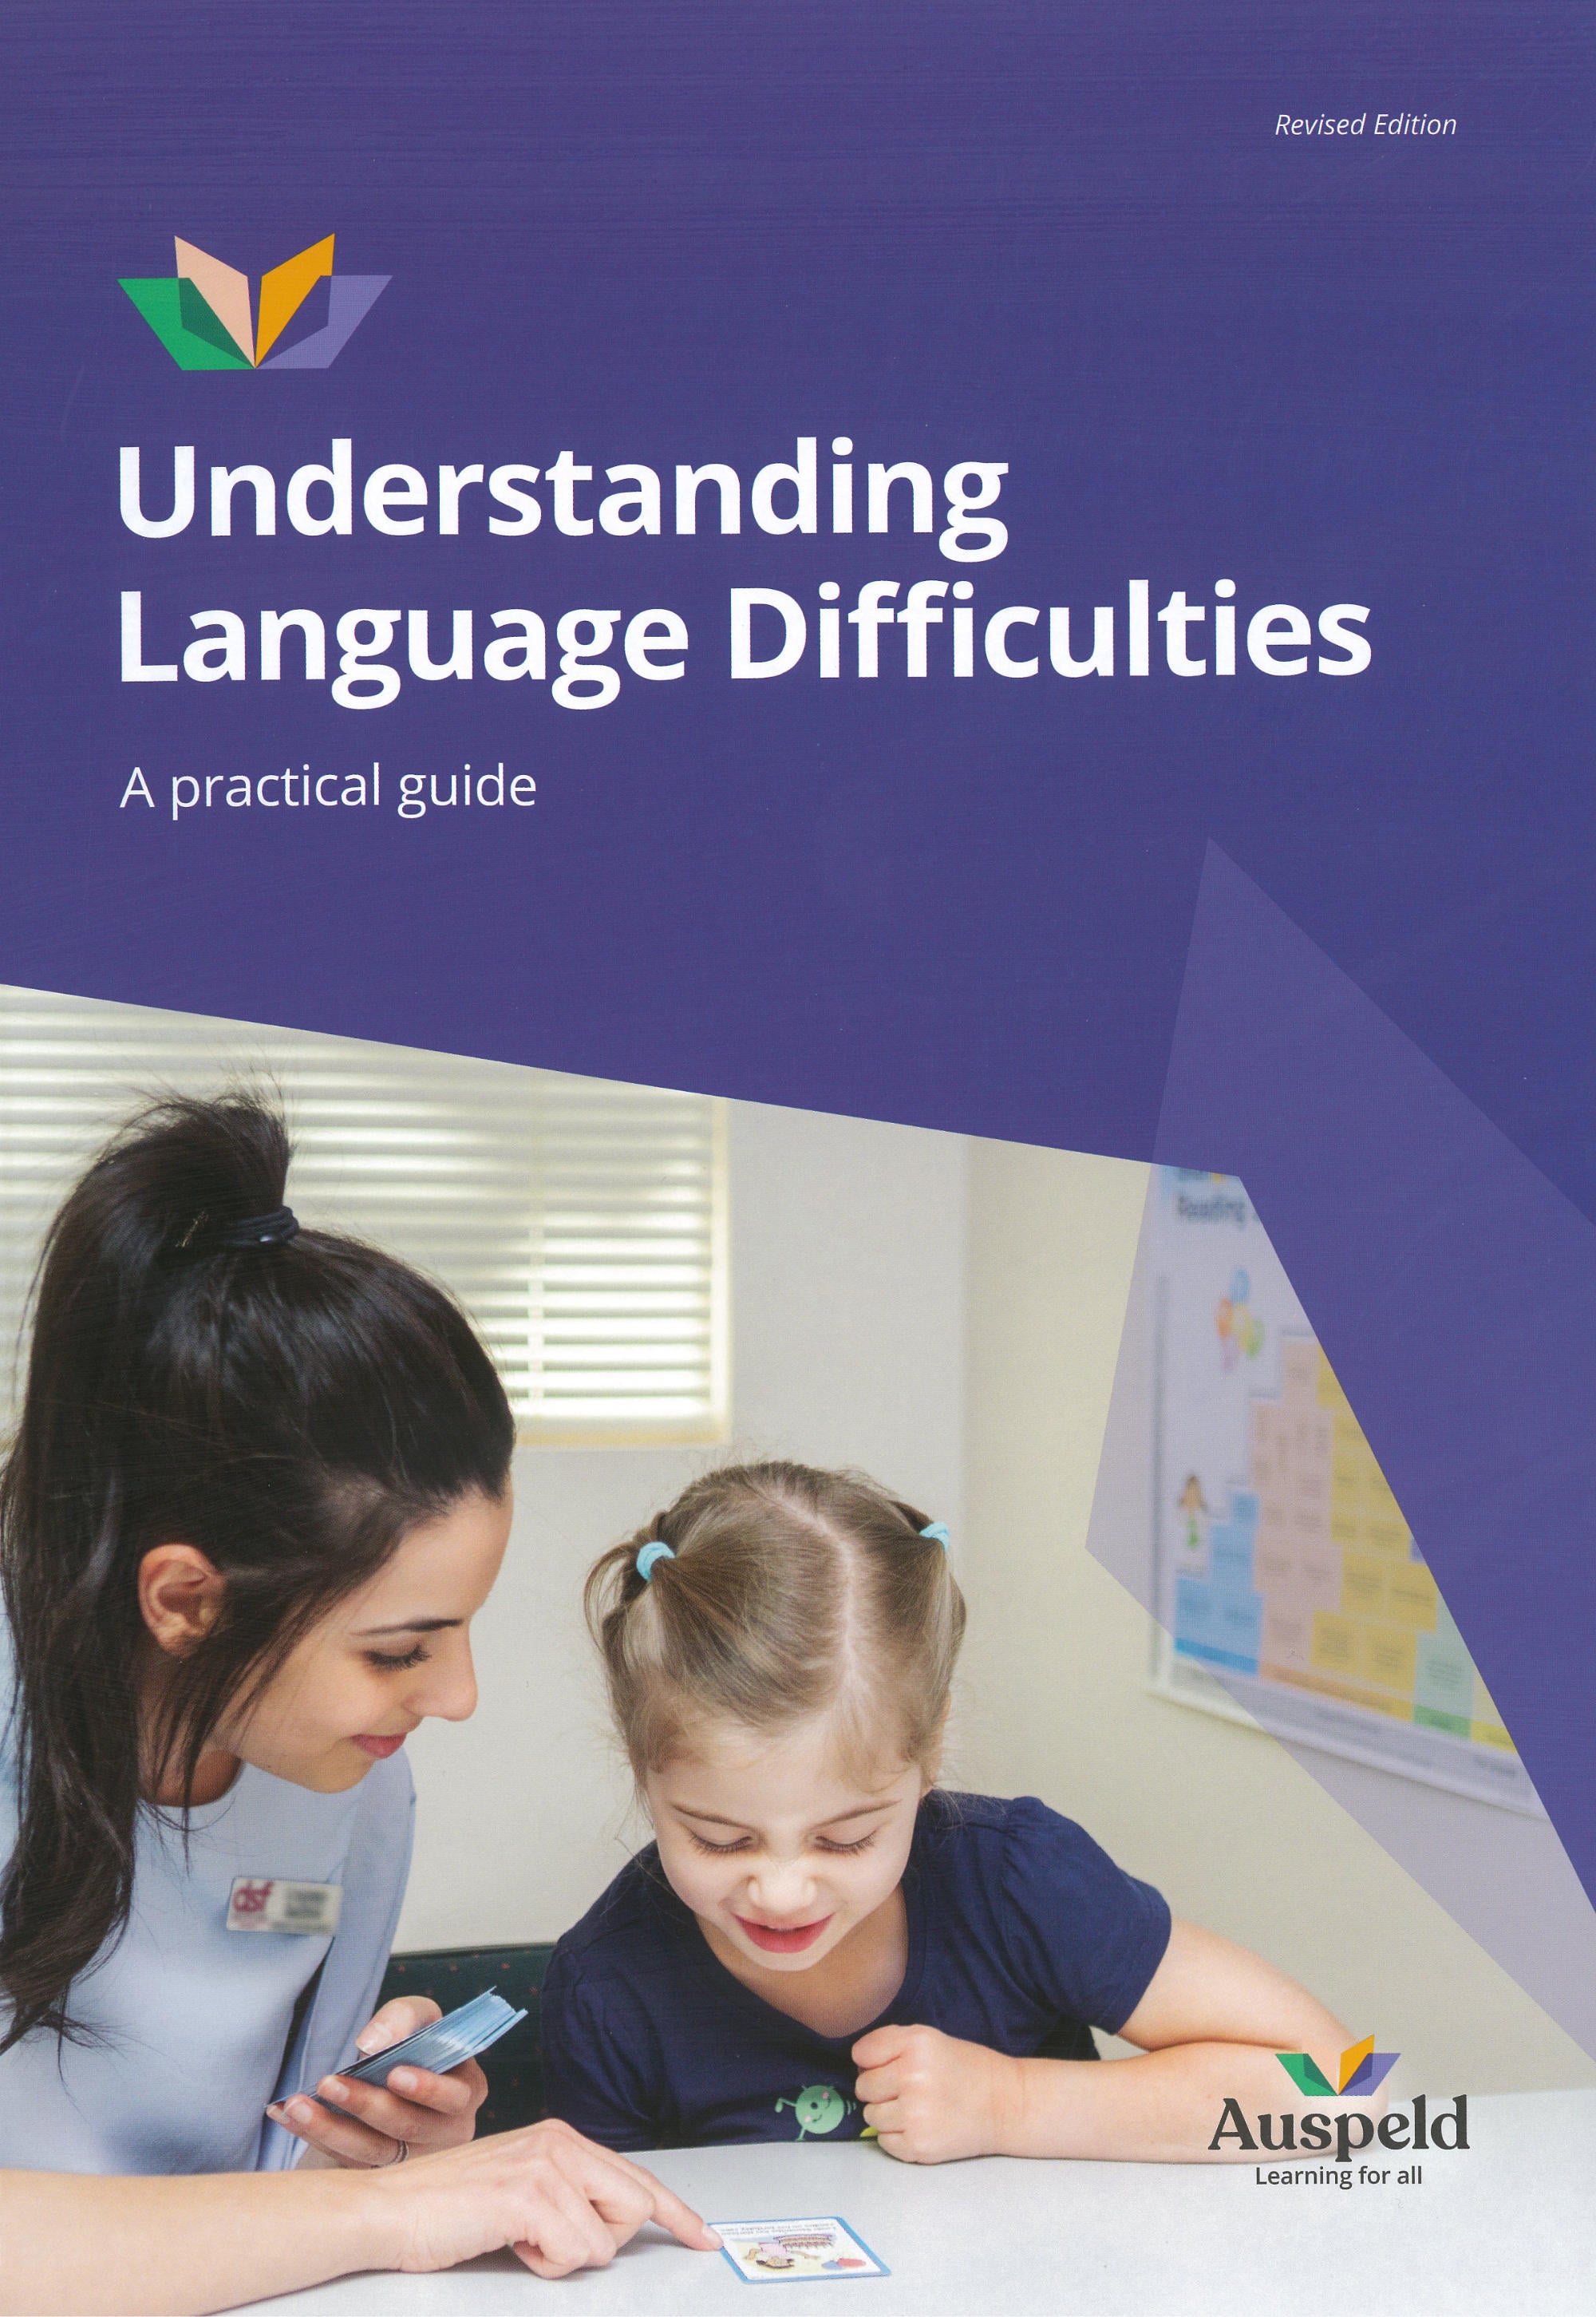 Understanding Language Difficulties: A Practical Guide (Revised, 2021)